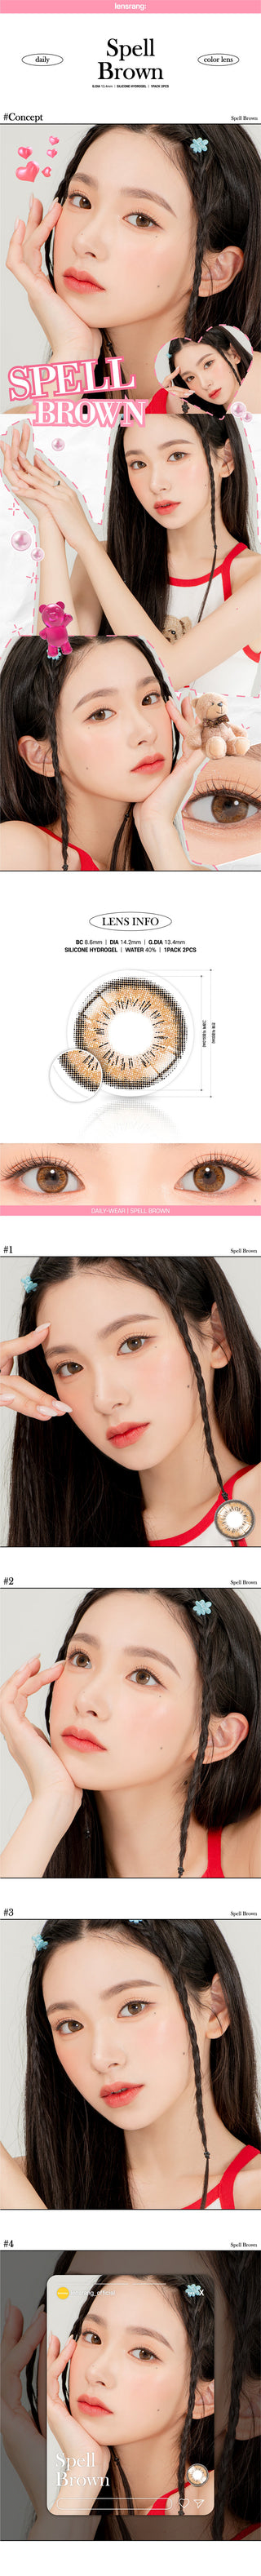 Lensrang Spell Brown Color Contact Lens - EyeCandys